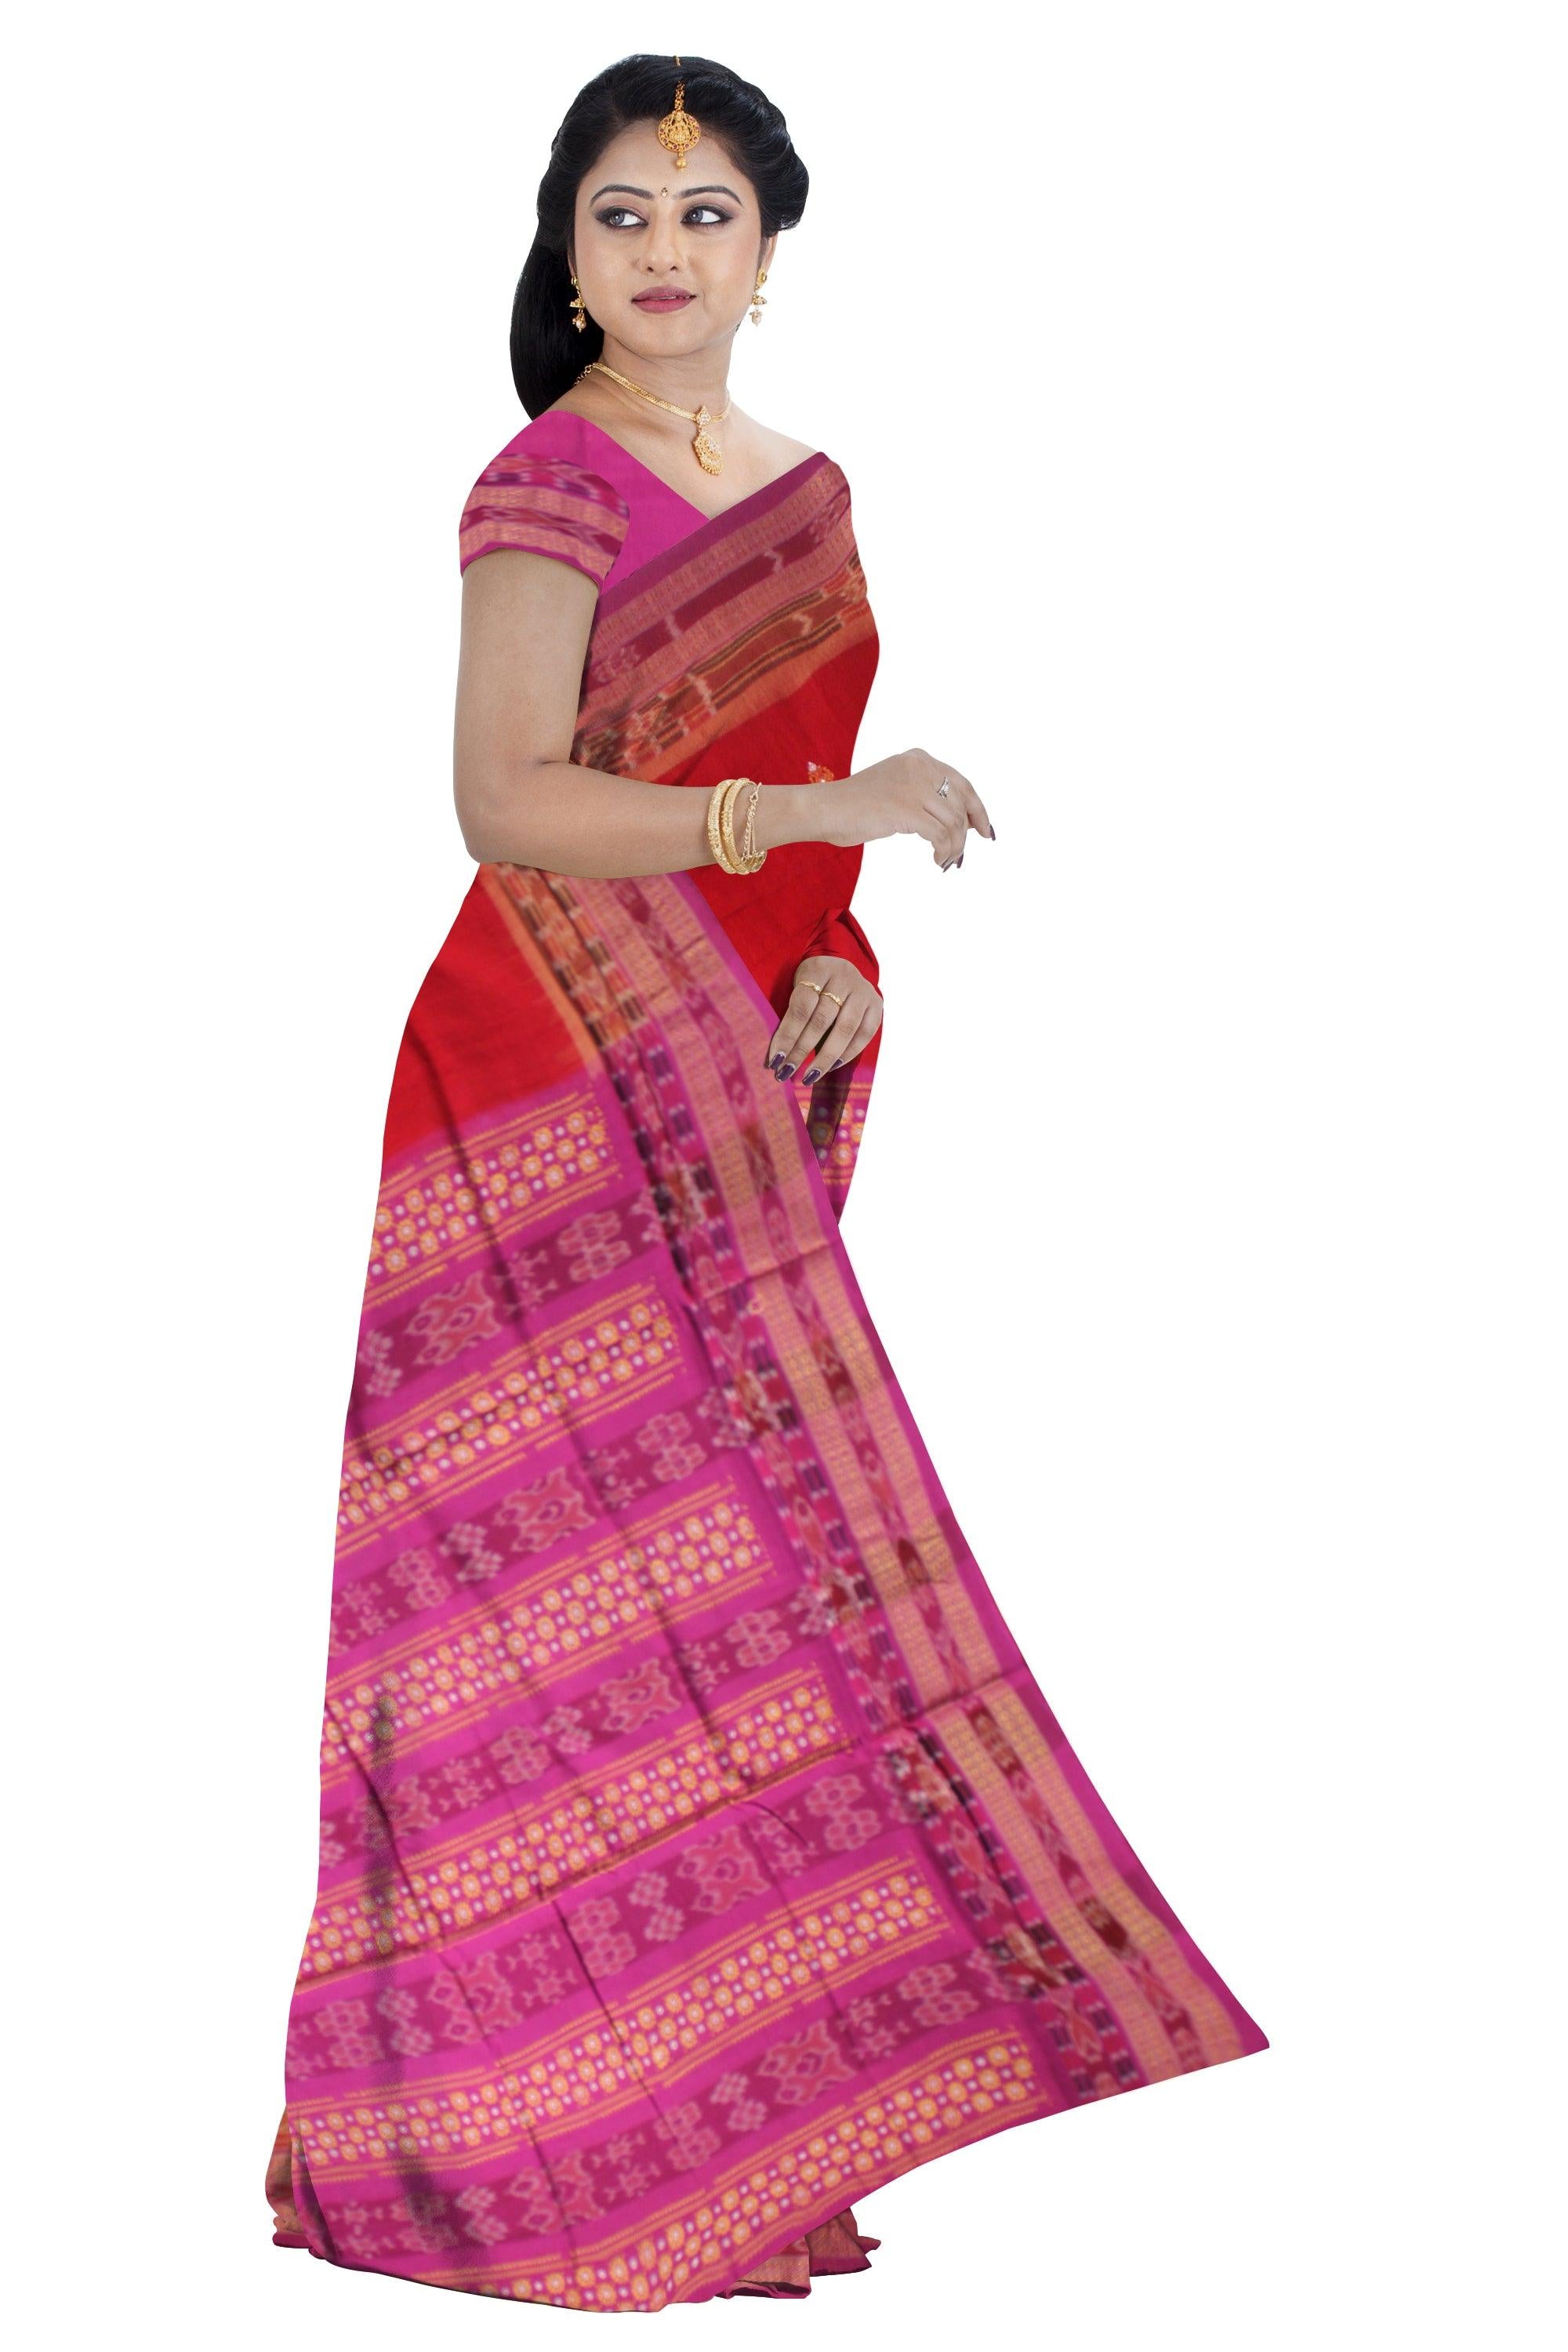 A BANDHA PATTERN COTTON SAREE IN RED AND PINK COLOR , WITH  BLOUSE PIECE. - Koshali Arts & Crafts Enterprise